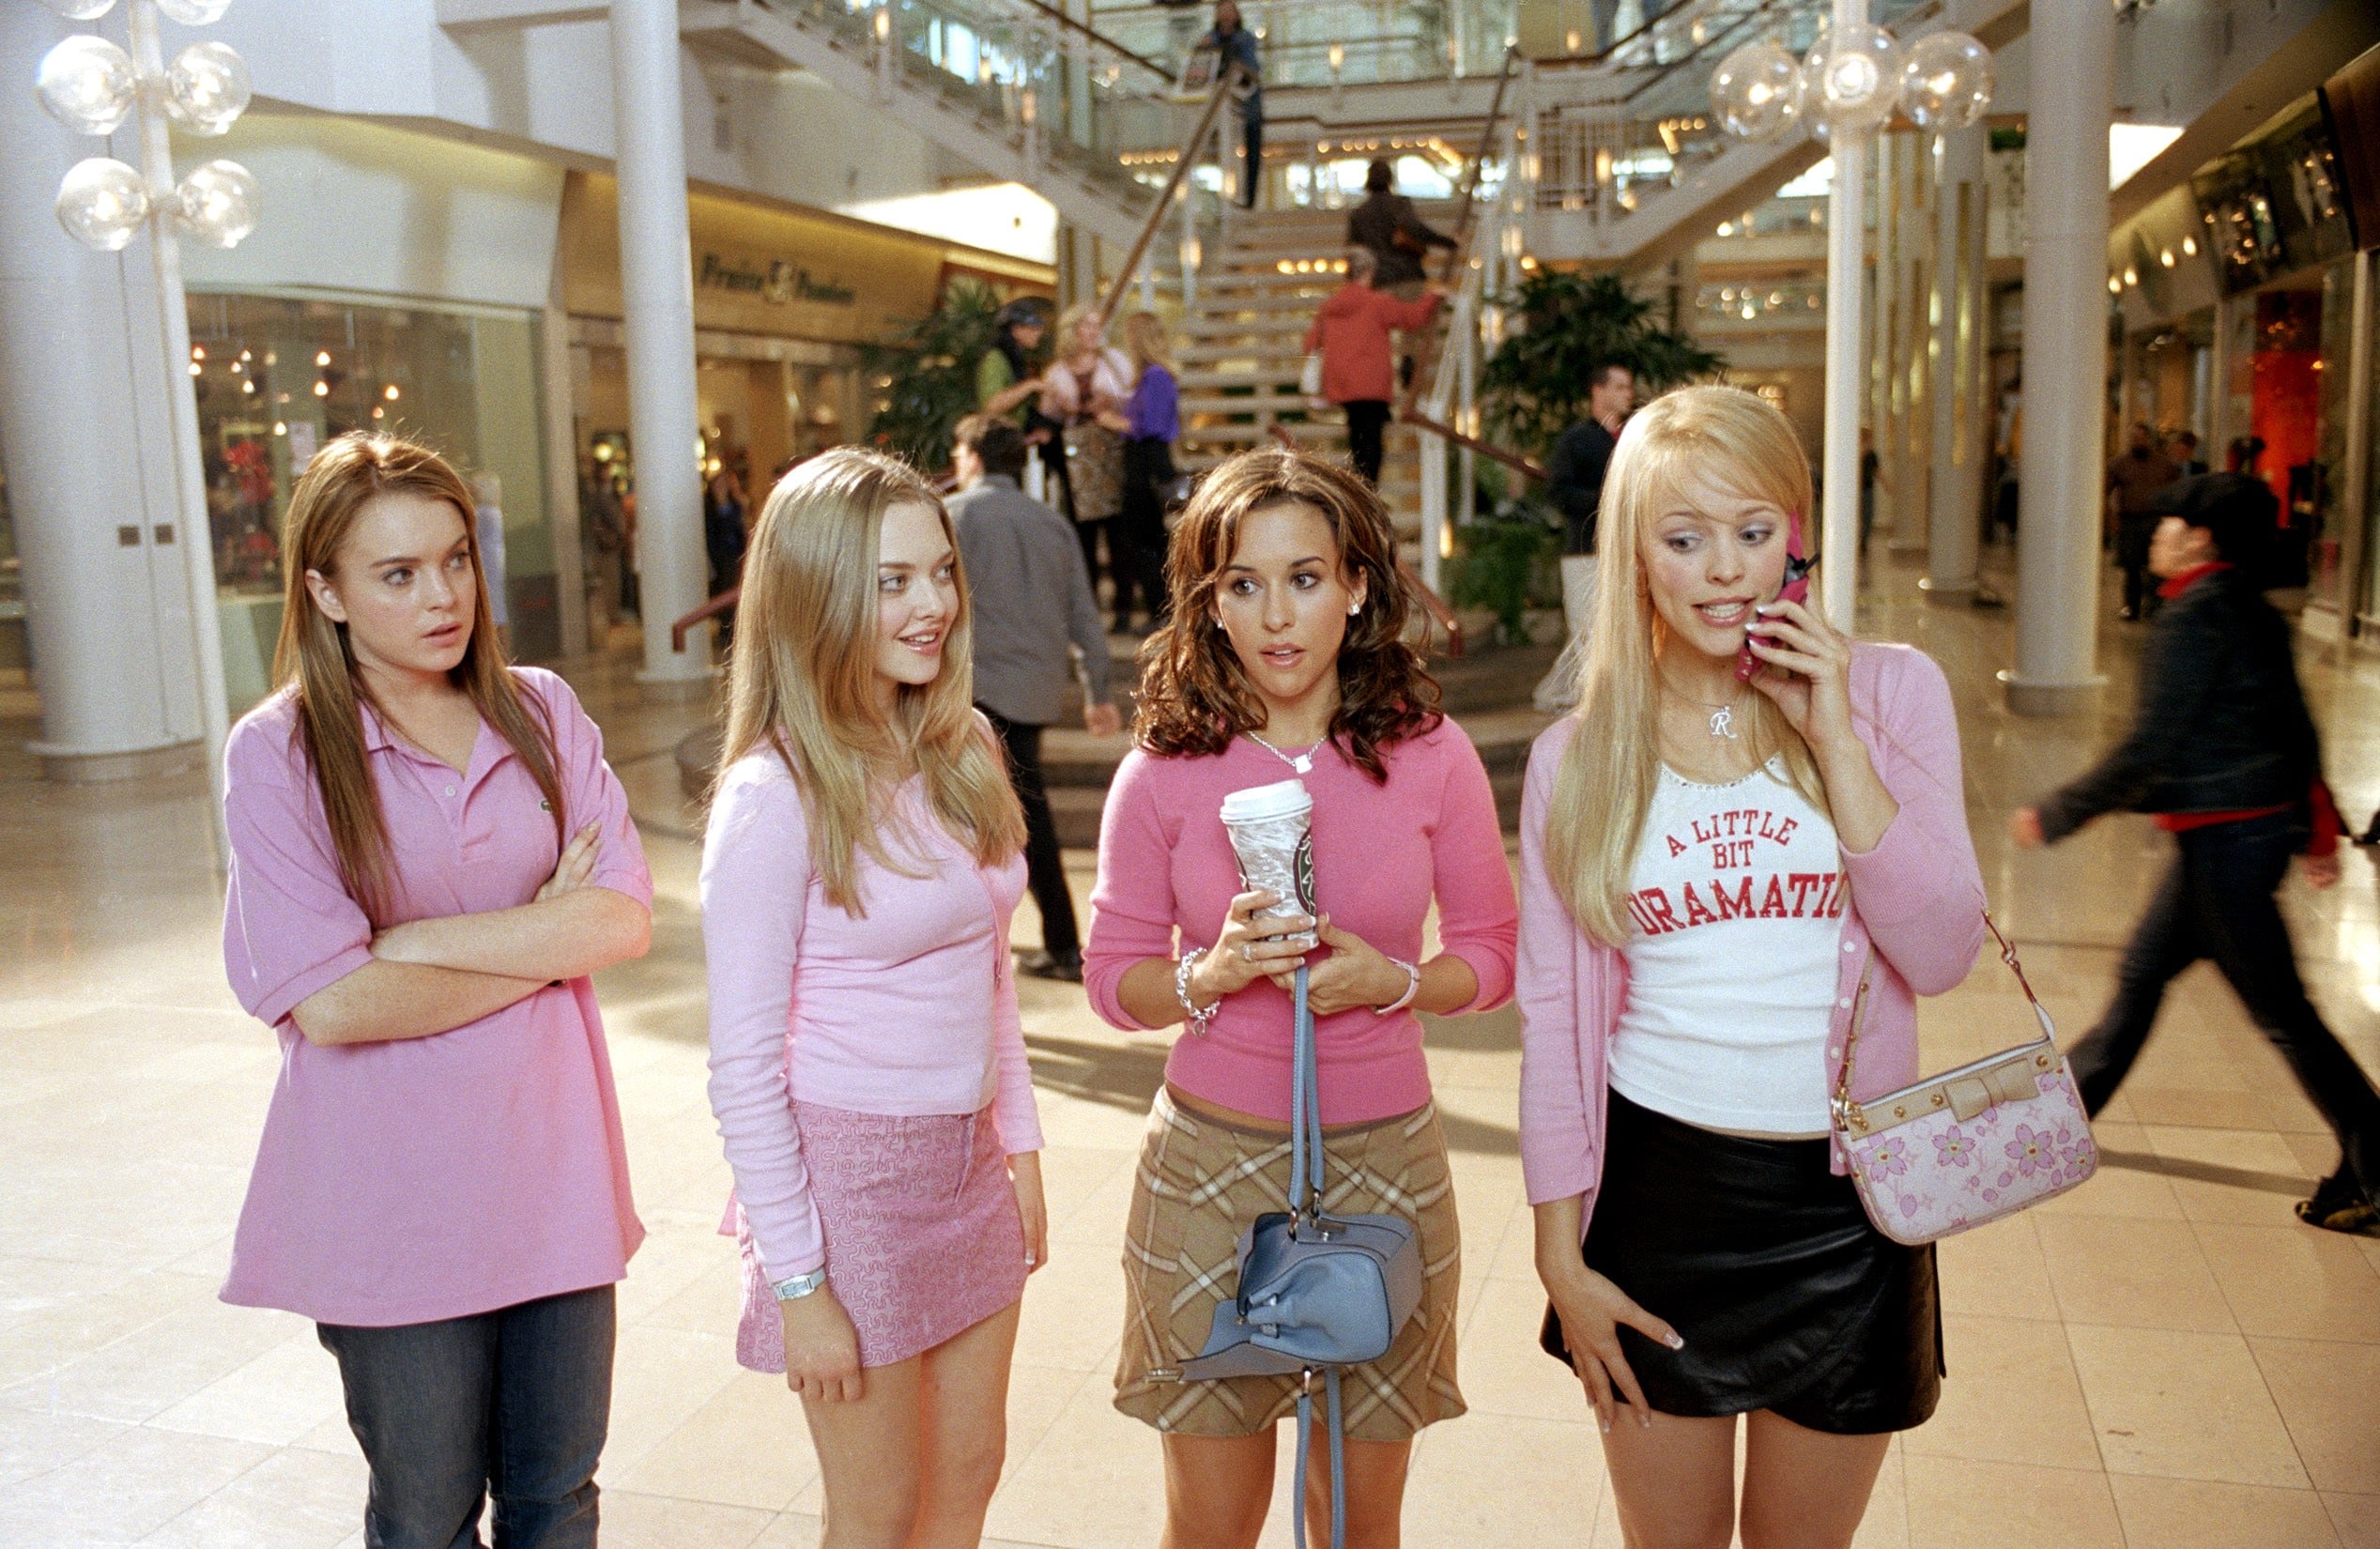 Mean Girls Costumes for Halloween